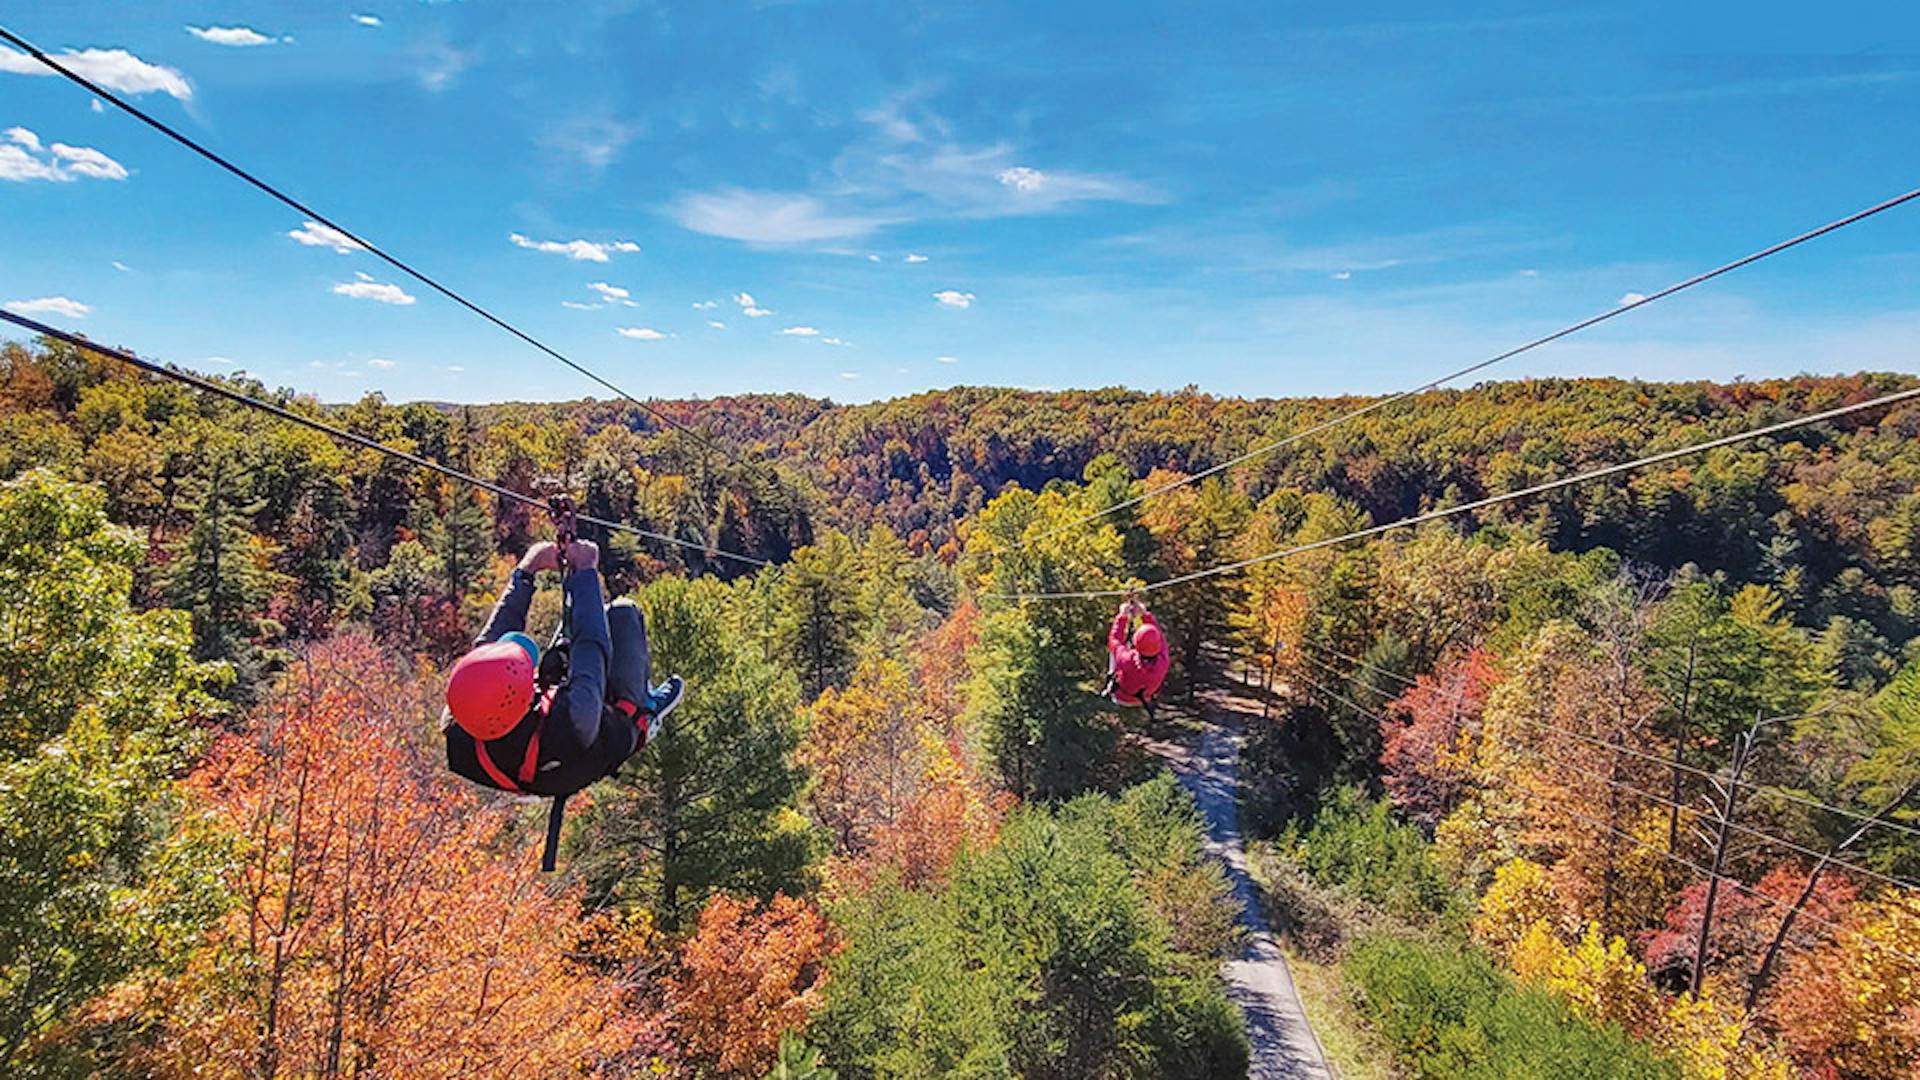 People zip lining at Red River Gorge Ziplines in Campton, Kentucky (photo courtesy of Red River Gorge Ziplines)